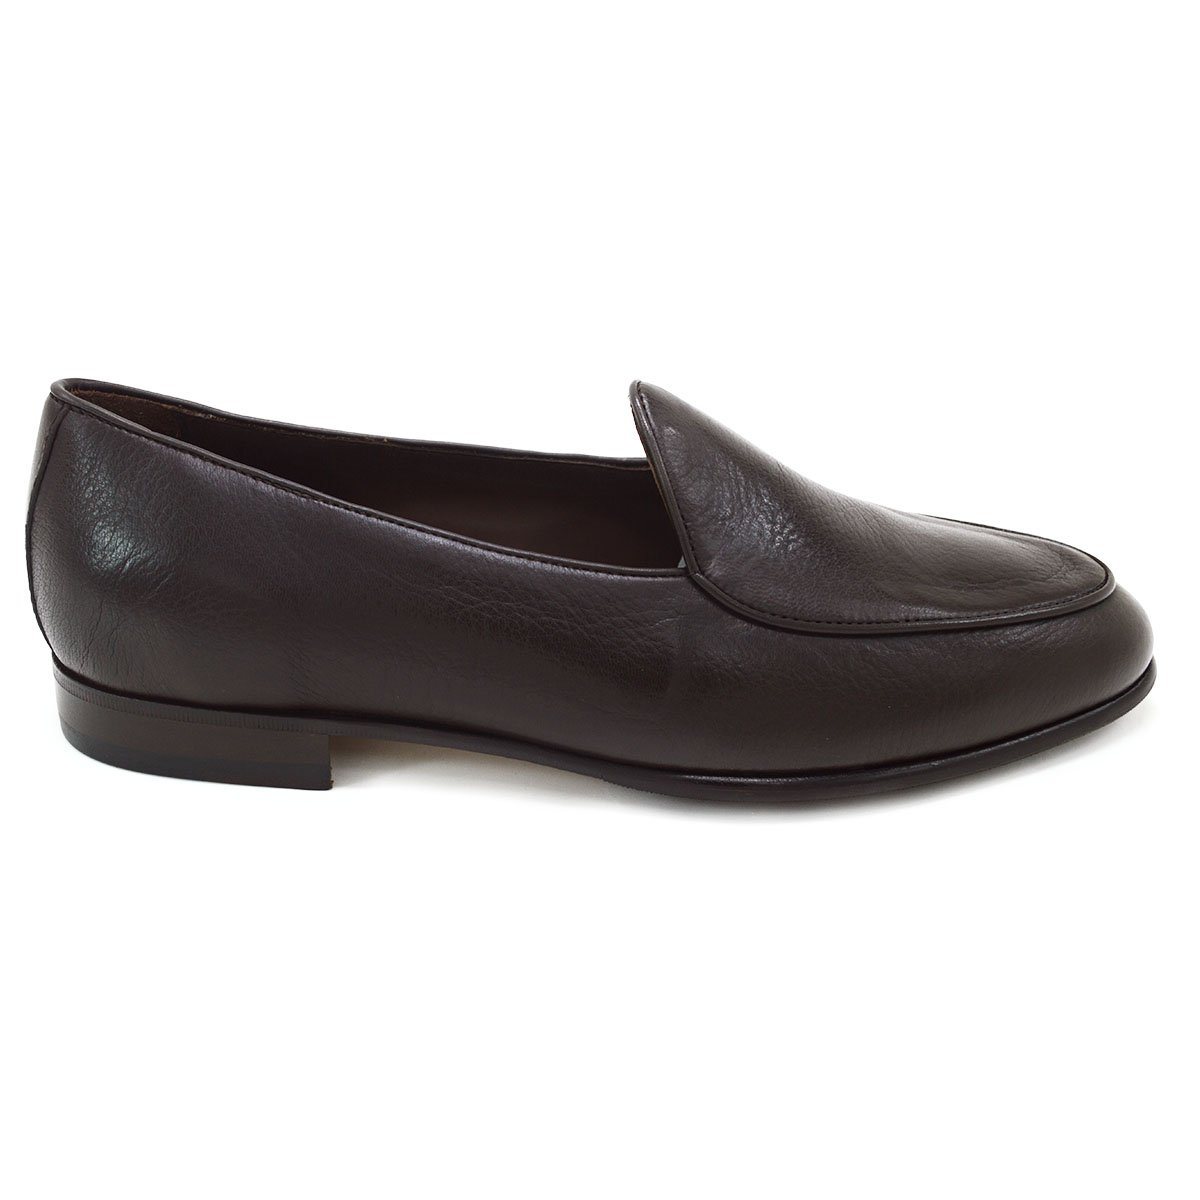 Berwick 1707 Belgian Loafer Collection - A Fine Pair of Shoes - High ...